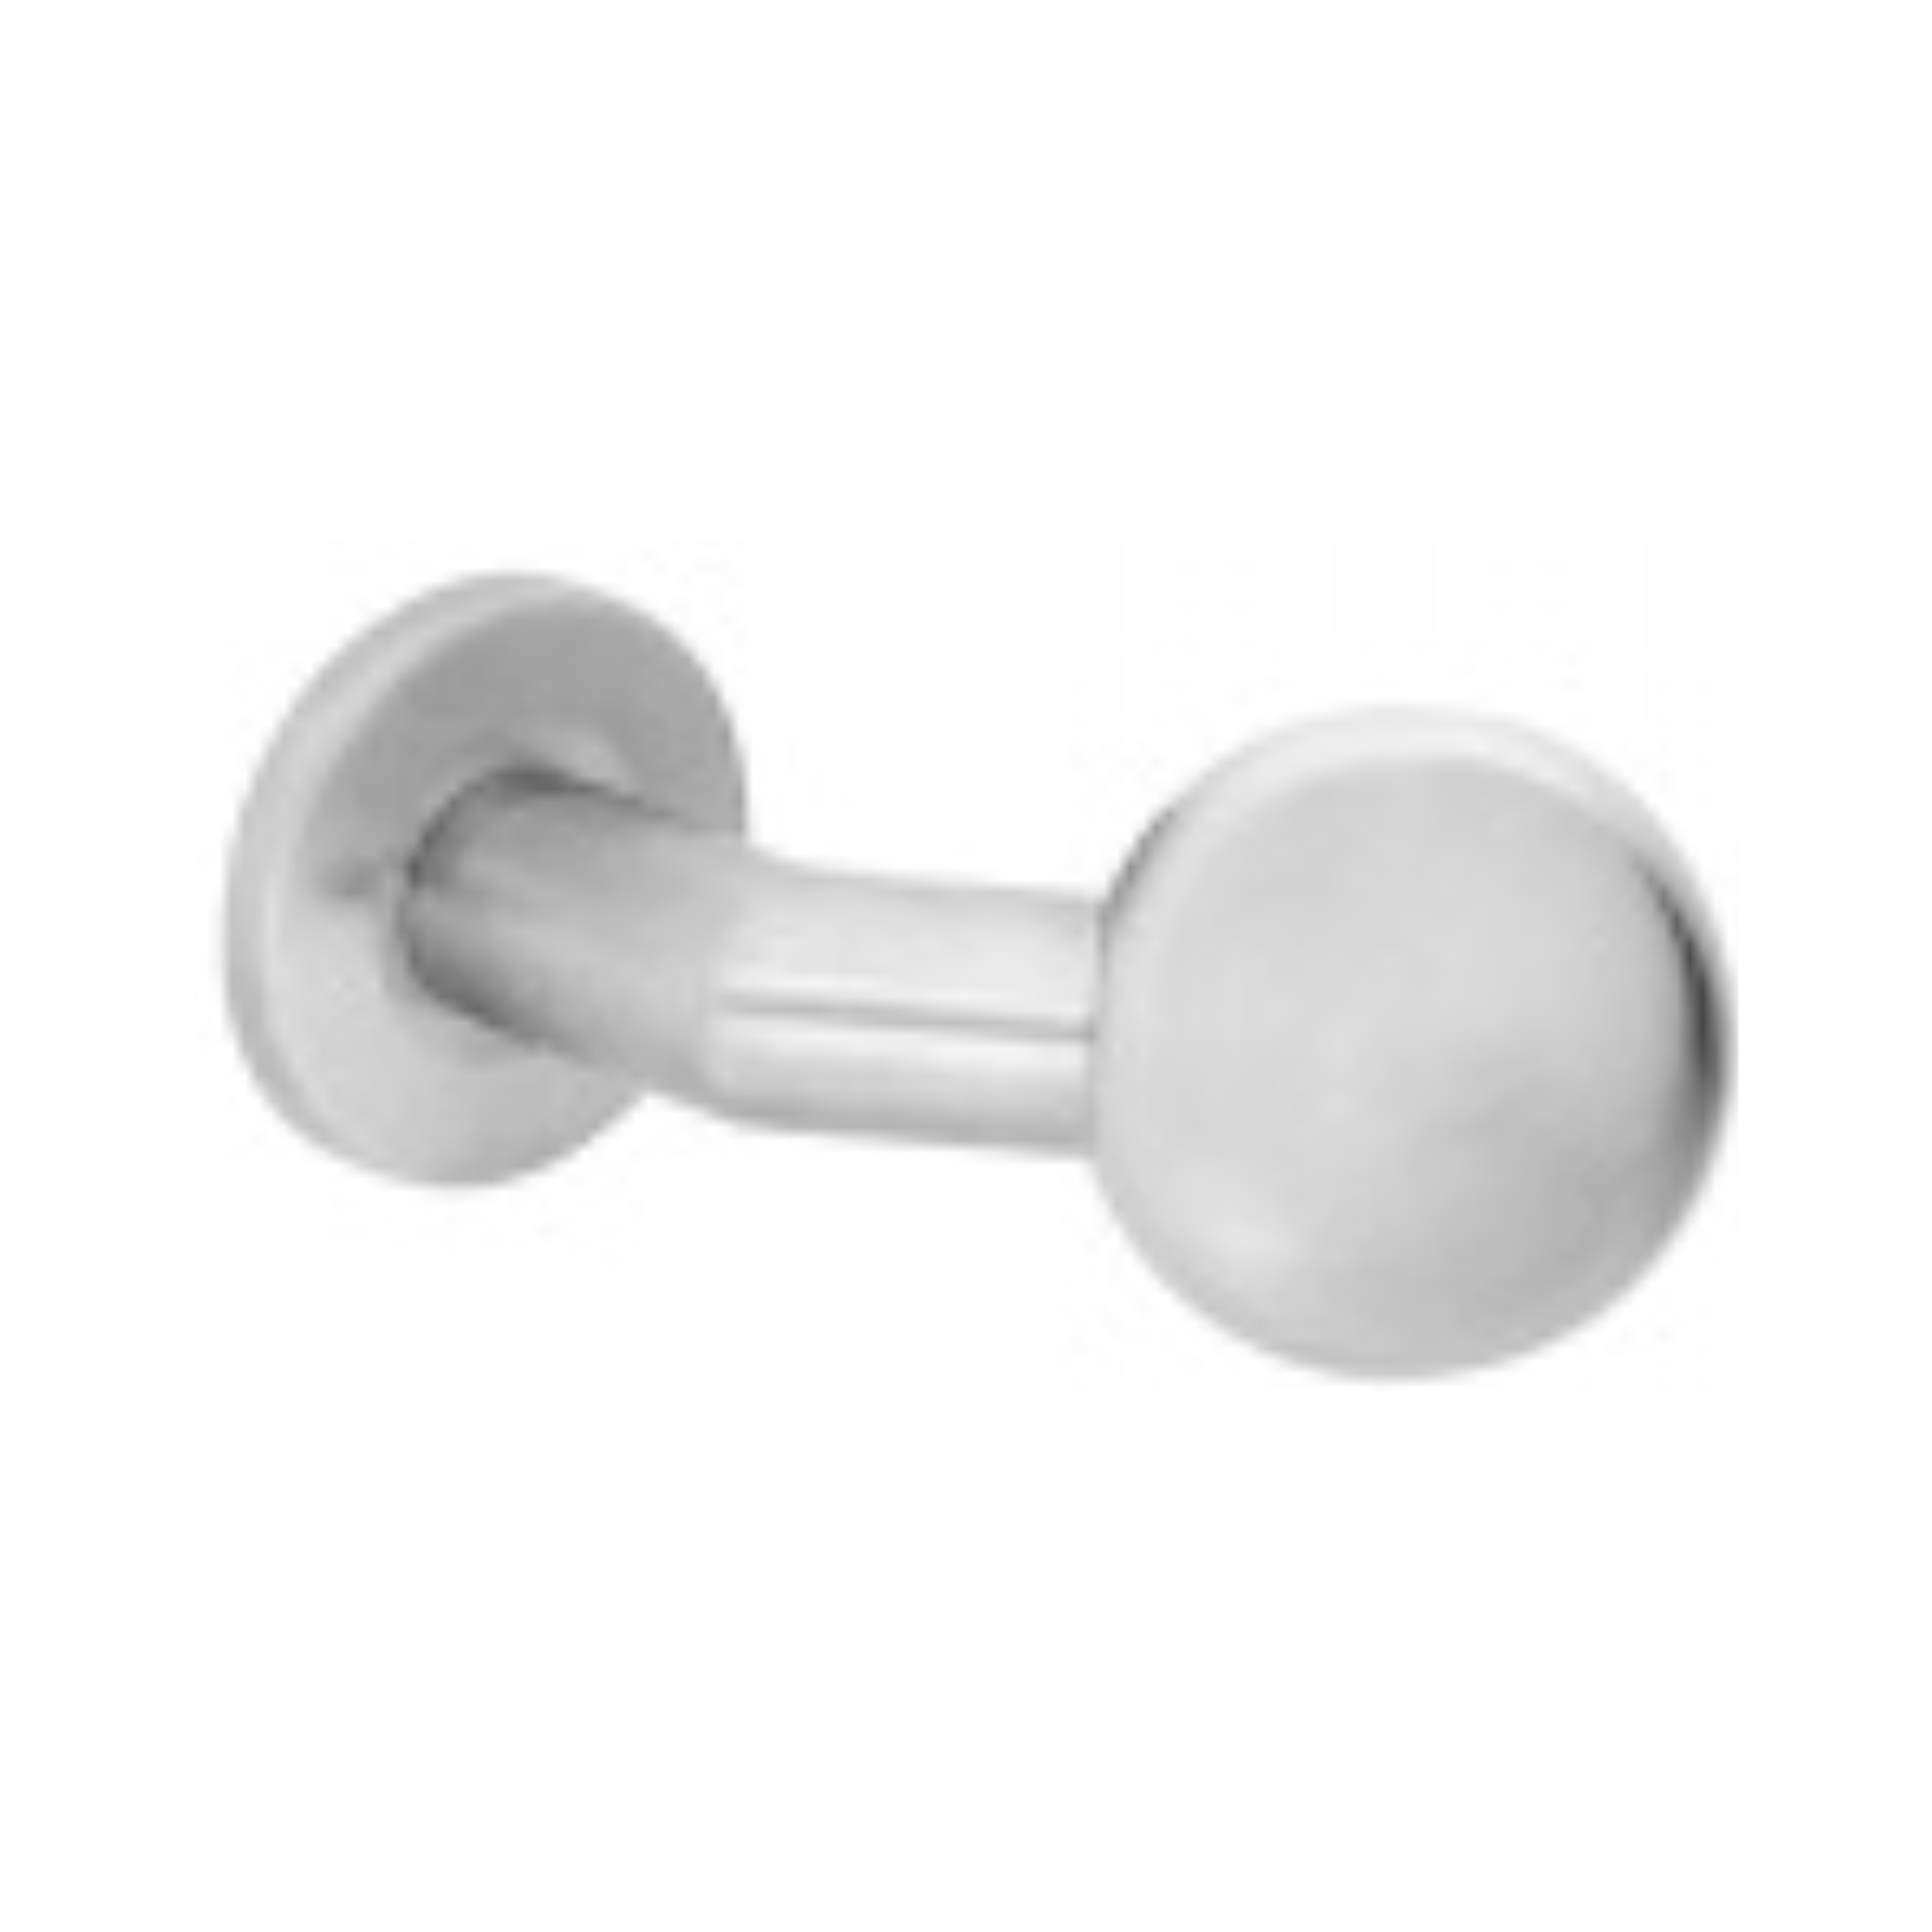 QS3825, Knob Handle, Rotating Round Ball, Stainless Steel, QS